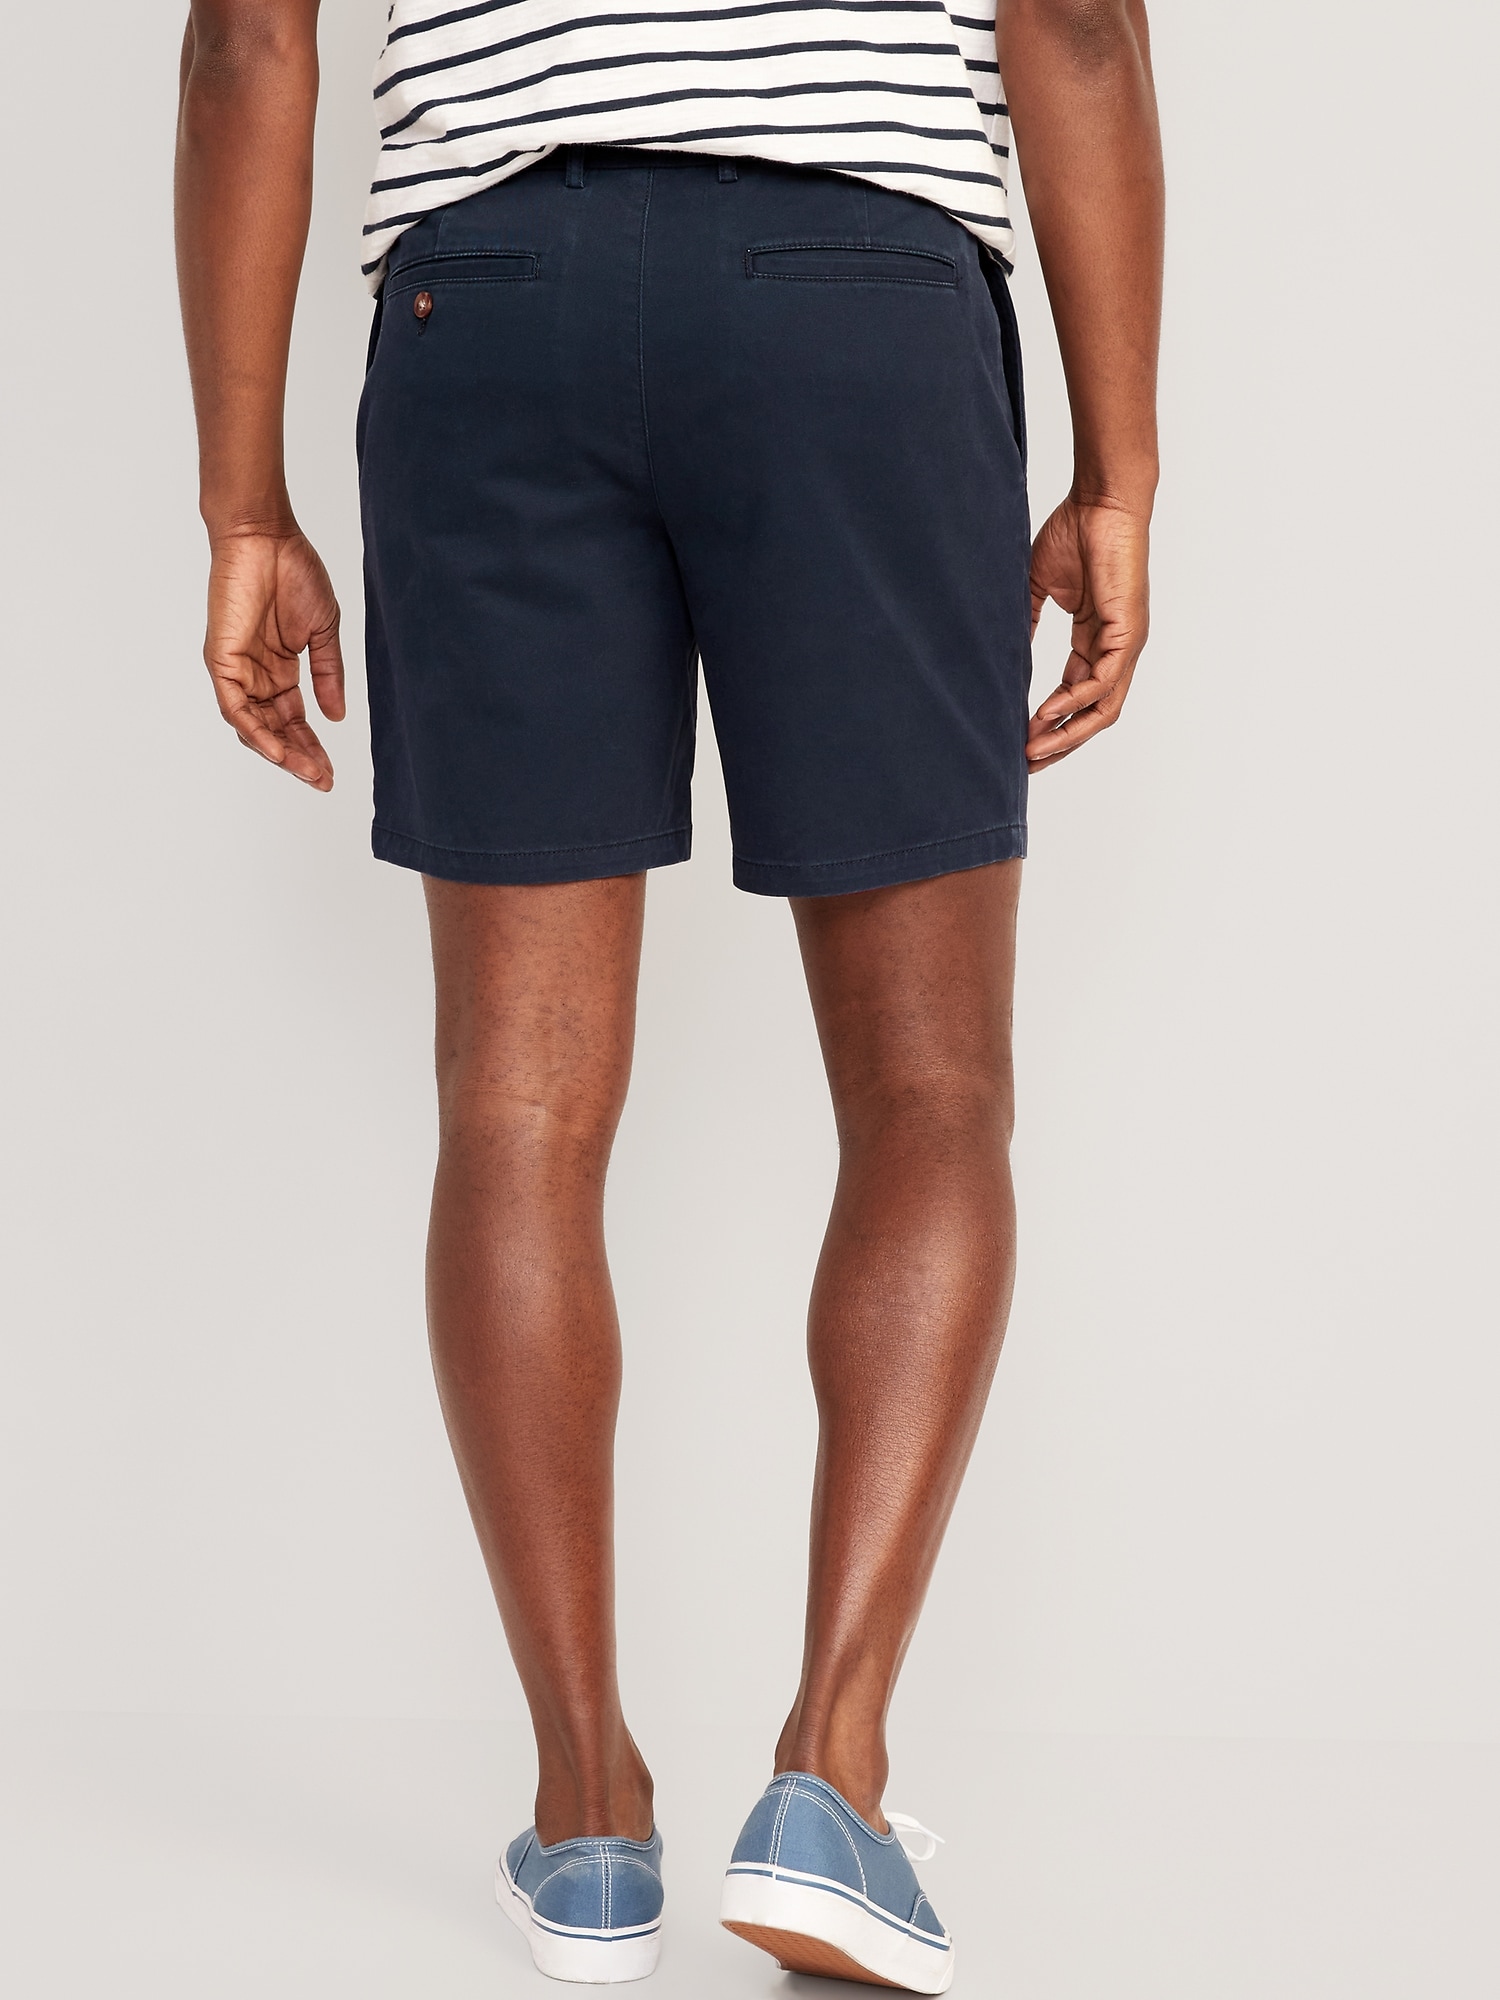 Slim Built-In Flex Ultimate Chino Pleated Shorts -- 7-inch inseam